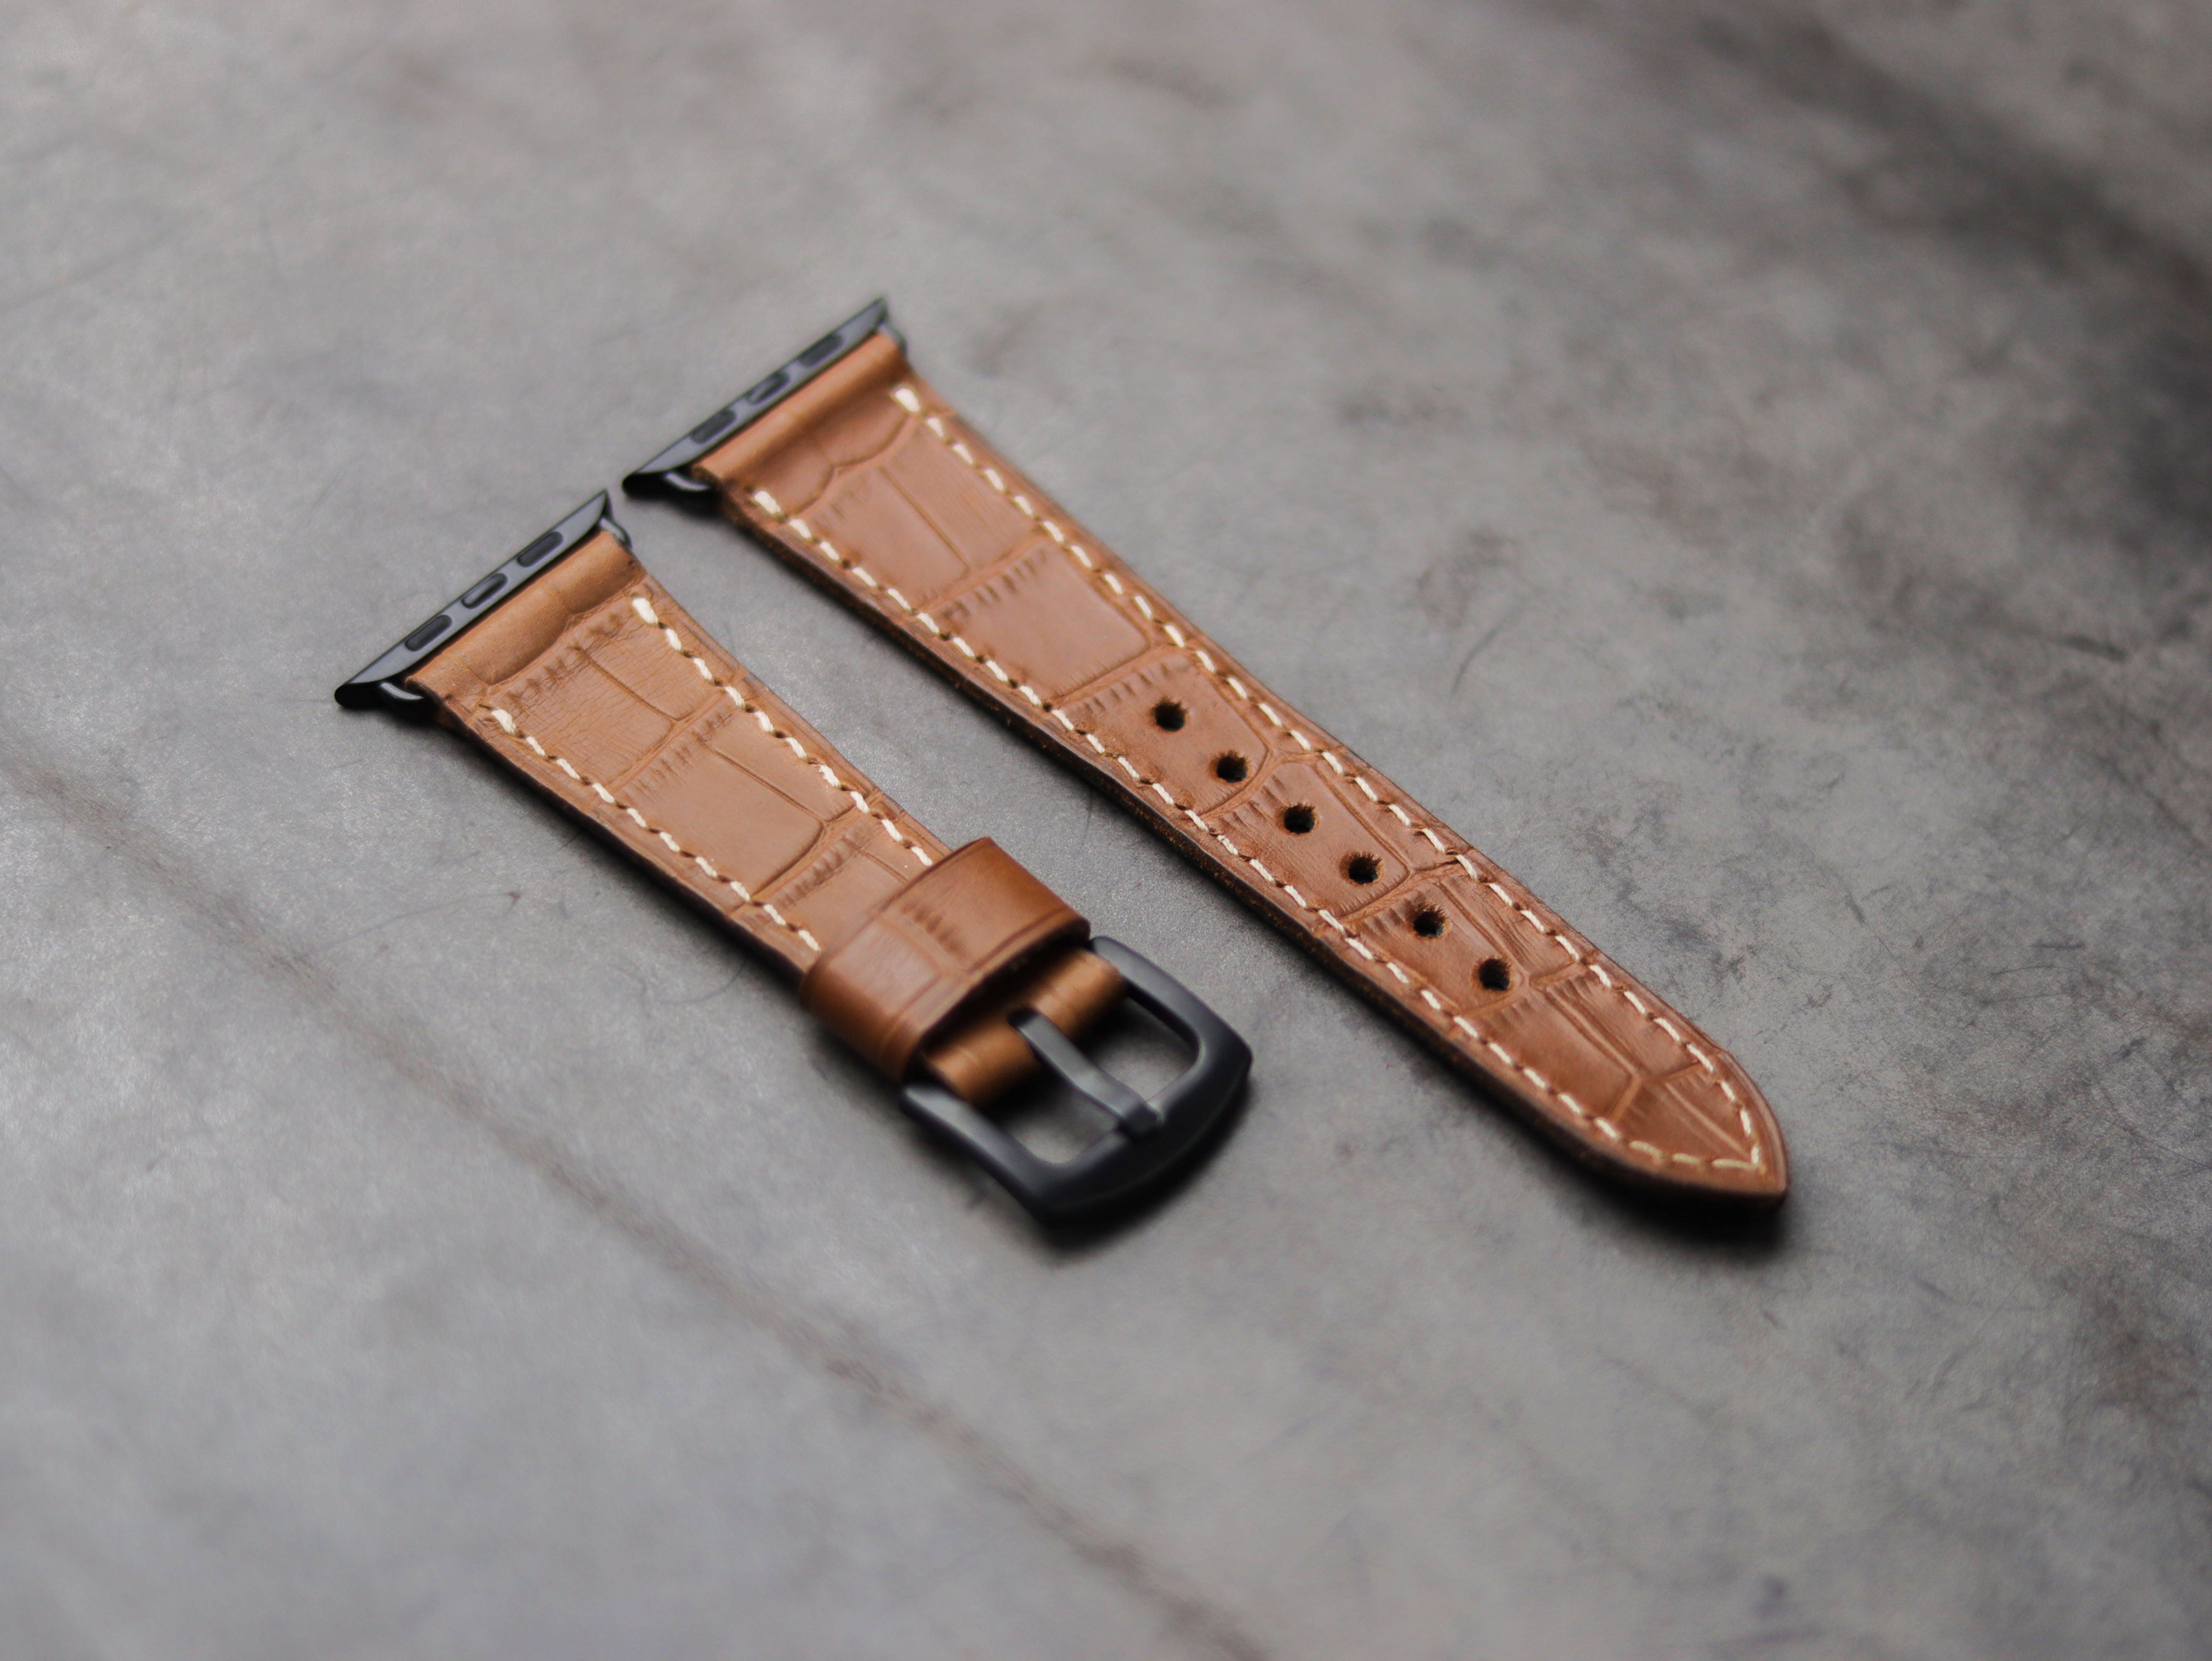 MUSTARD CROCO LEATHER - APPLE WATCH STRAPS HAND-CRAFTED